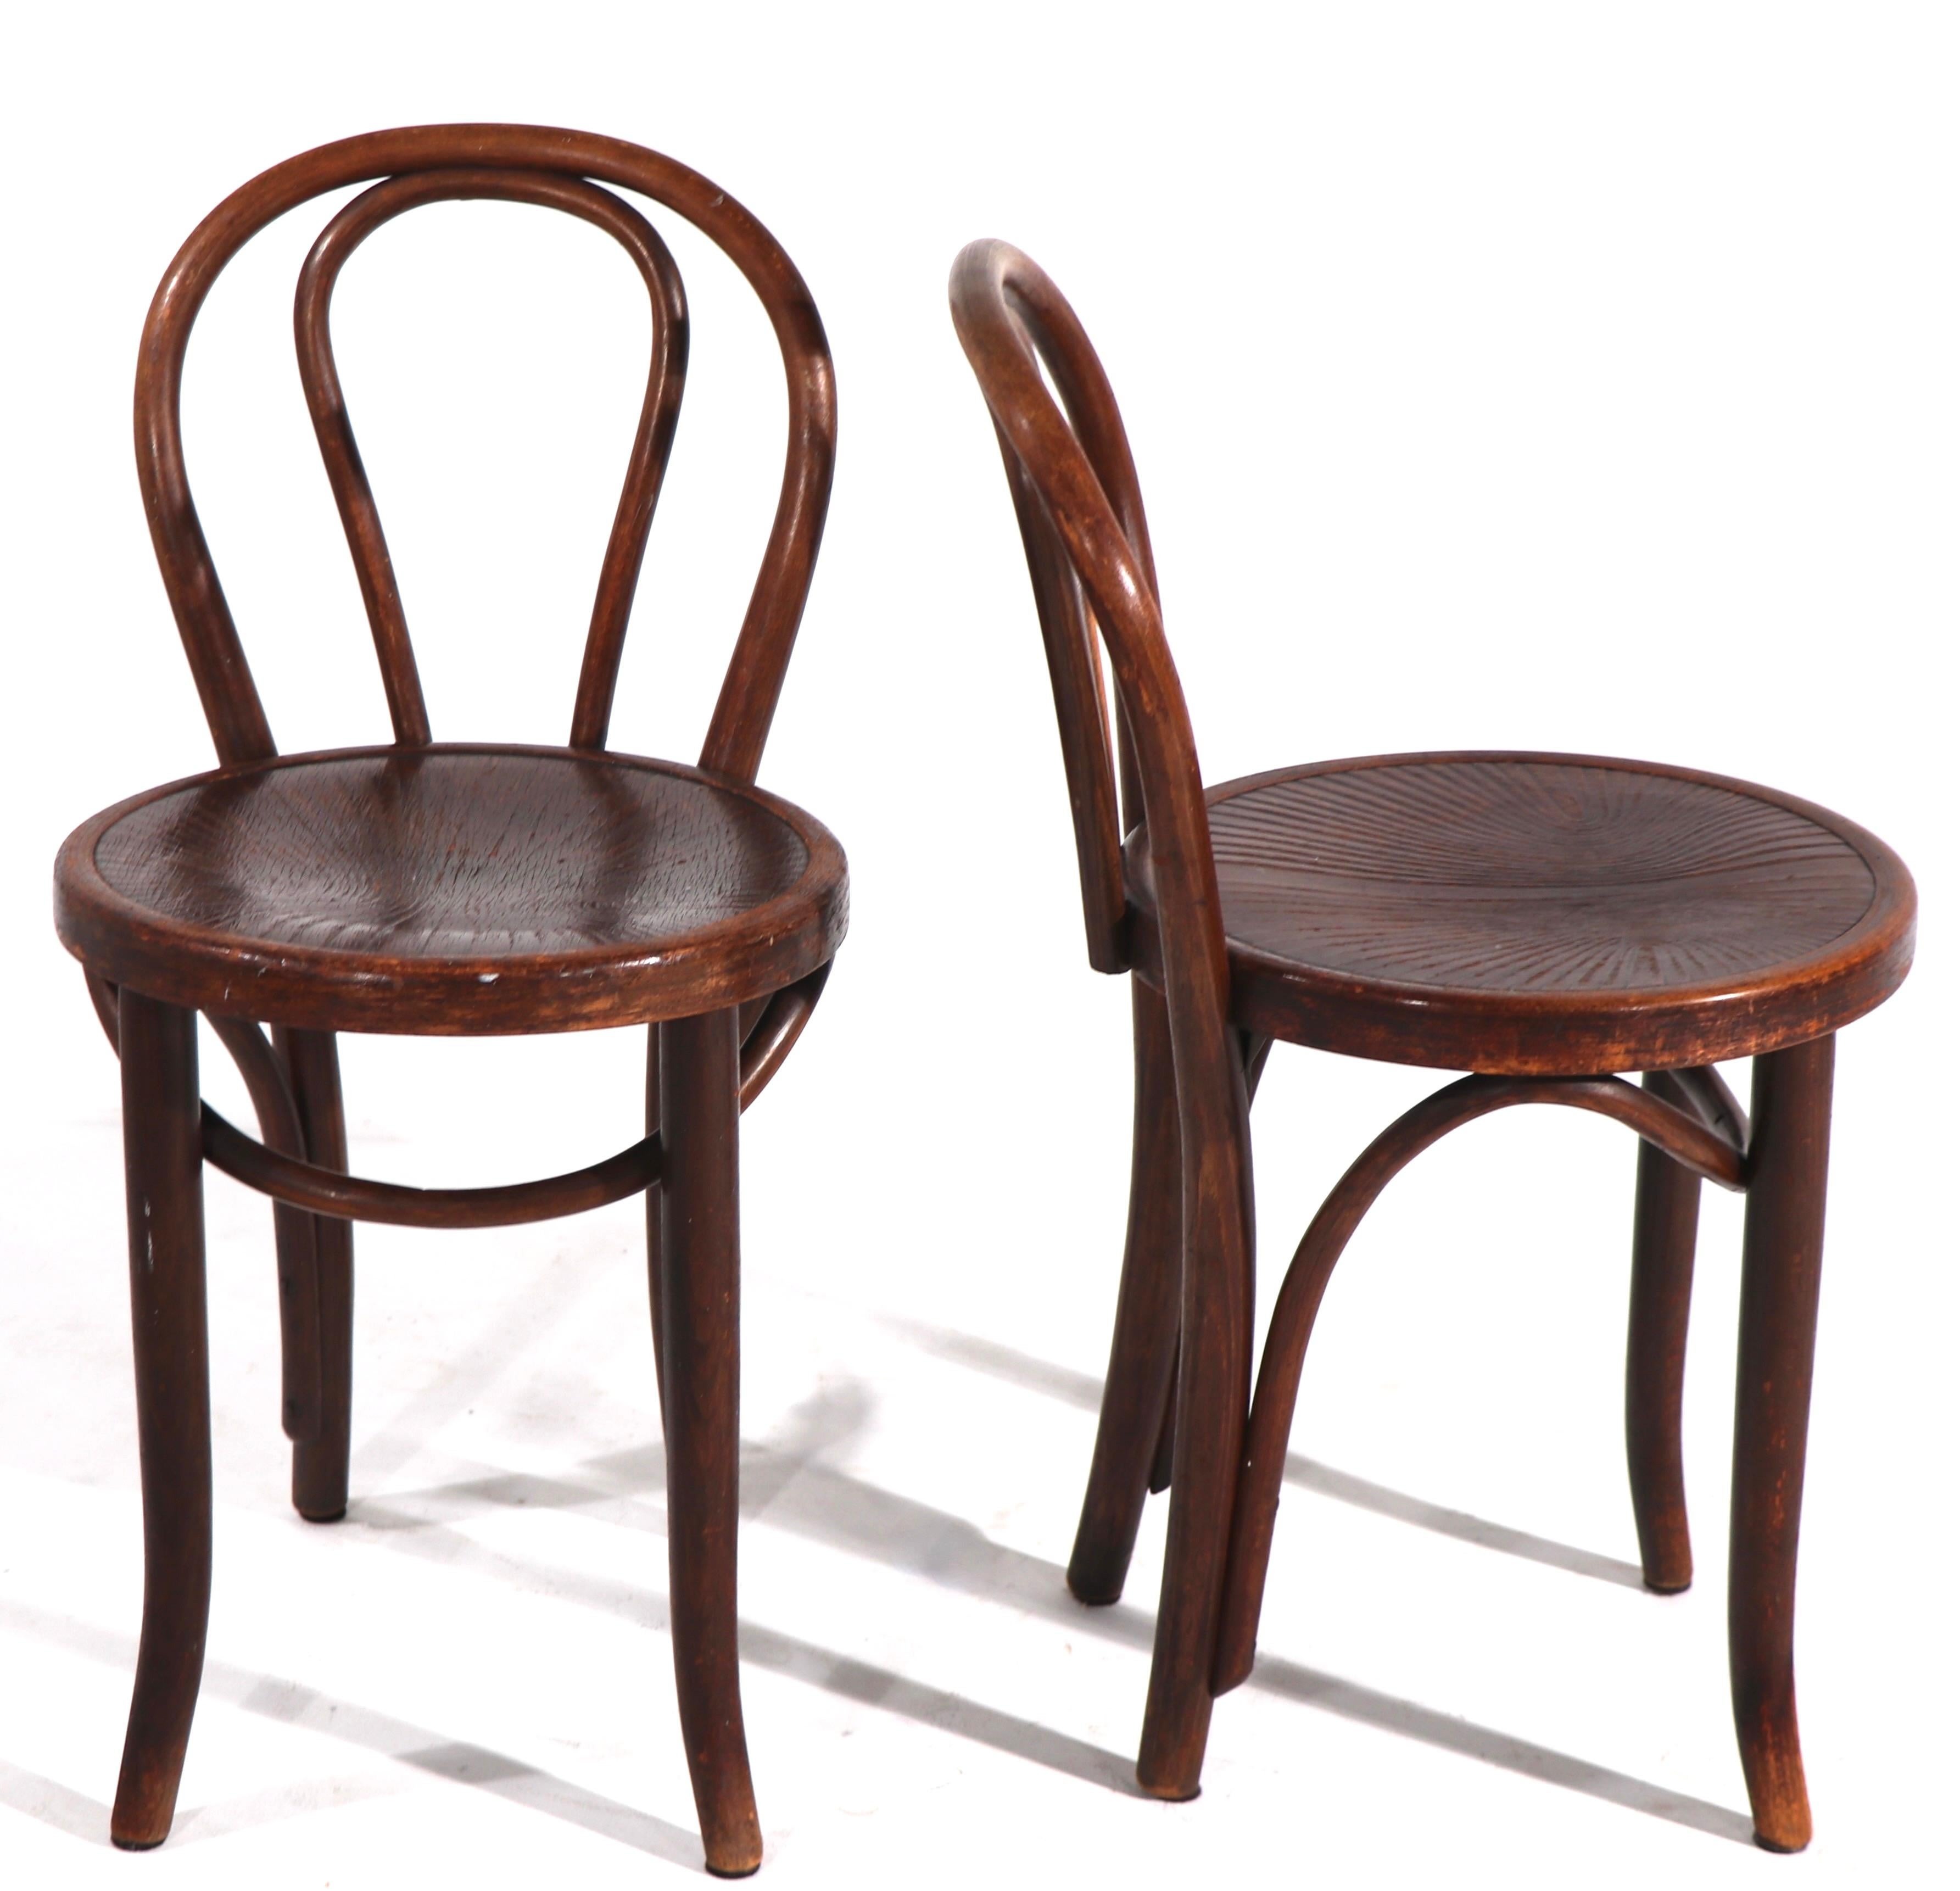 Pair classic bentwood side chairs by Thonet, in clean original, ready to use condition. Early bentwood chairs from the Vienna Secessionist period - This model has an unusual low back support, with a pressed wood seat - The chairs are labeled Thonet.